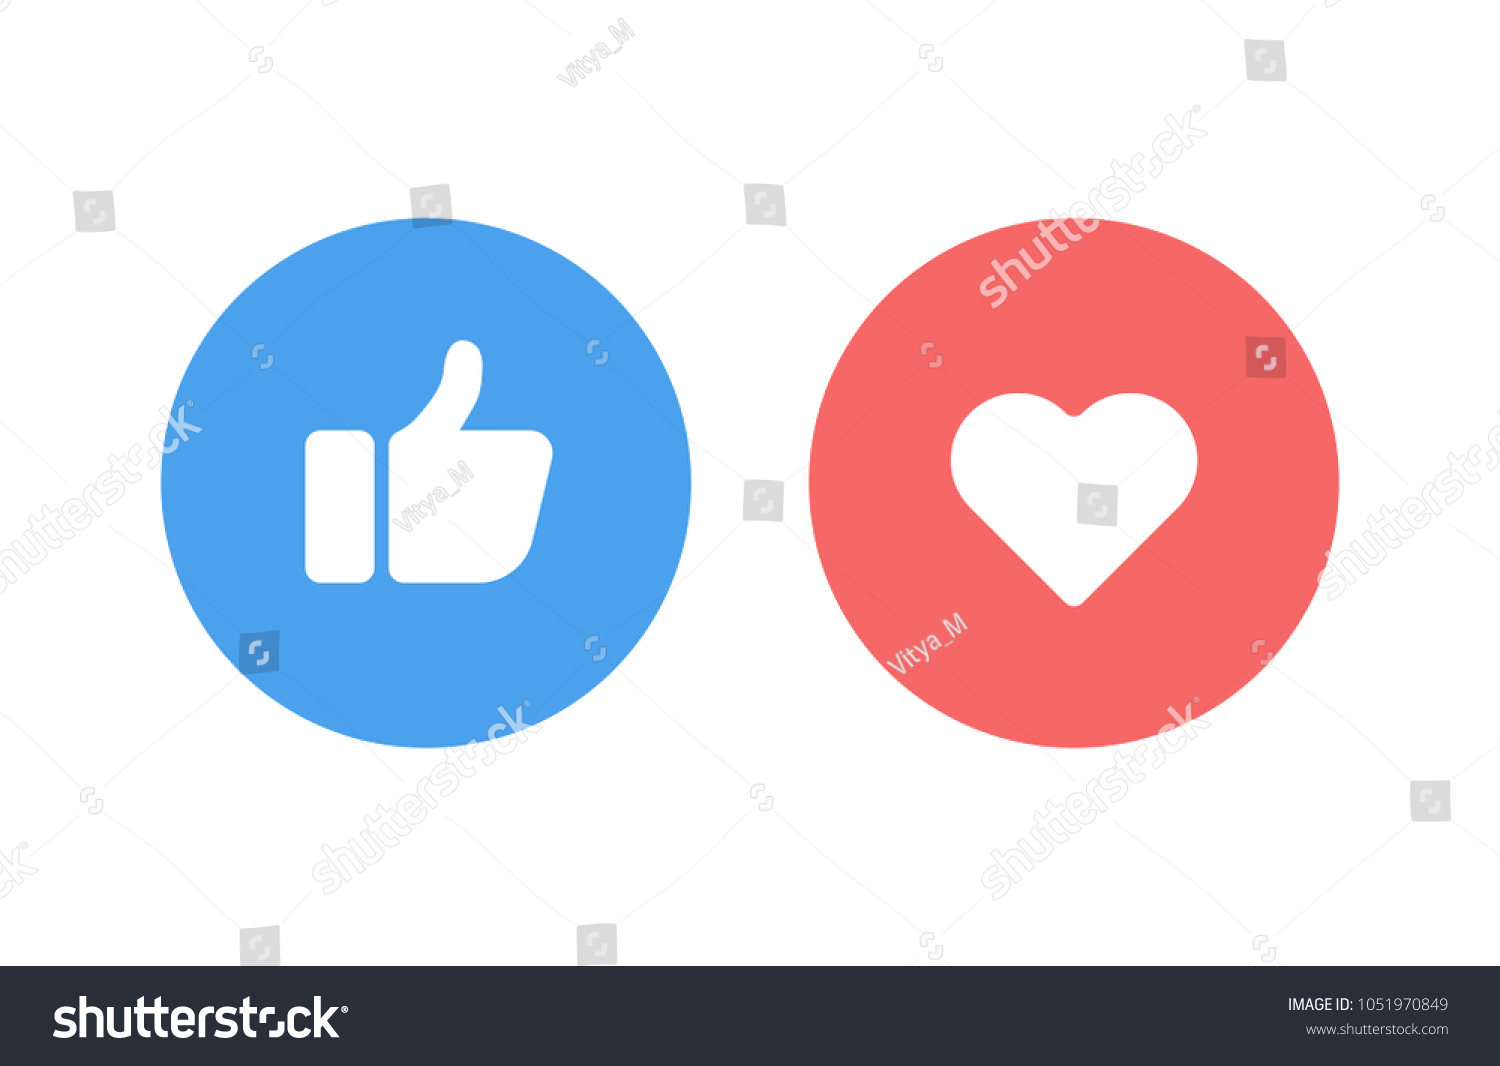 SVG of Thumbs up and hearts on a white background svg